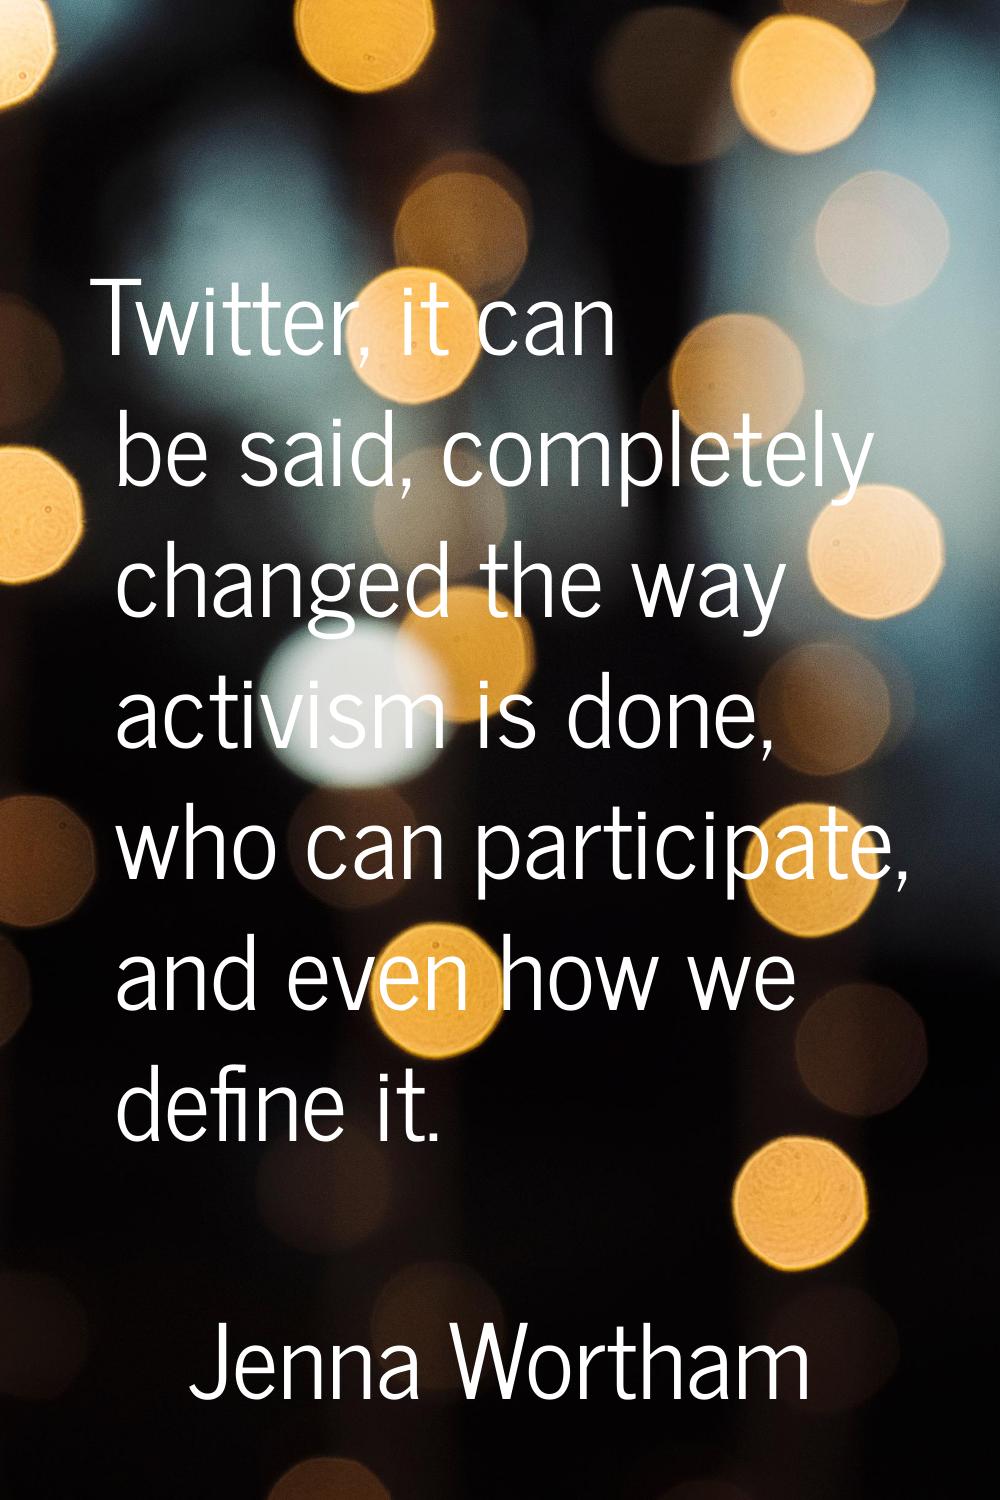 Twitter, it can be said, completely changed the way activism is done, who can participate, and even